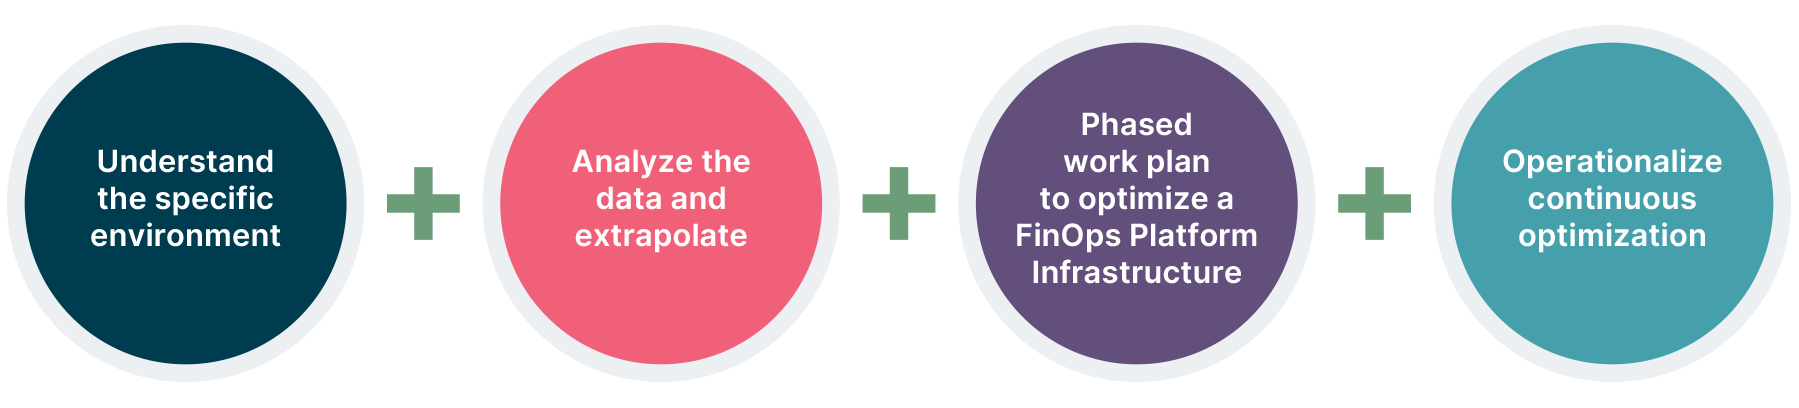 Four circles with text: 1) Understand the specific environment 2) Analyze the data and extrapolate 3) Phased work plan to optimize FinOps Platform Infrastructure 4) Operationalize continuous optimization